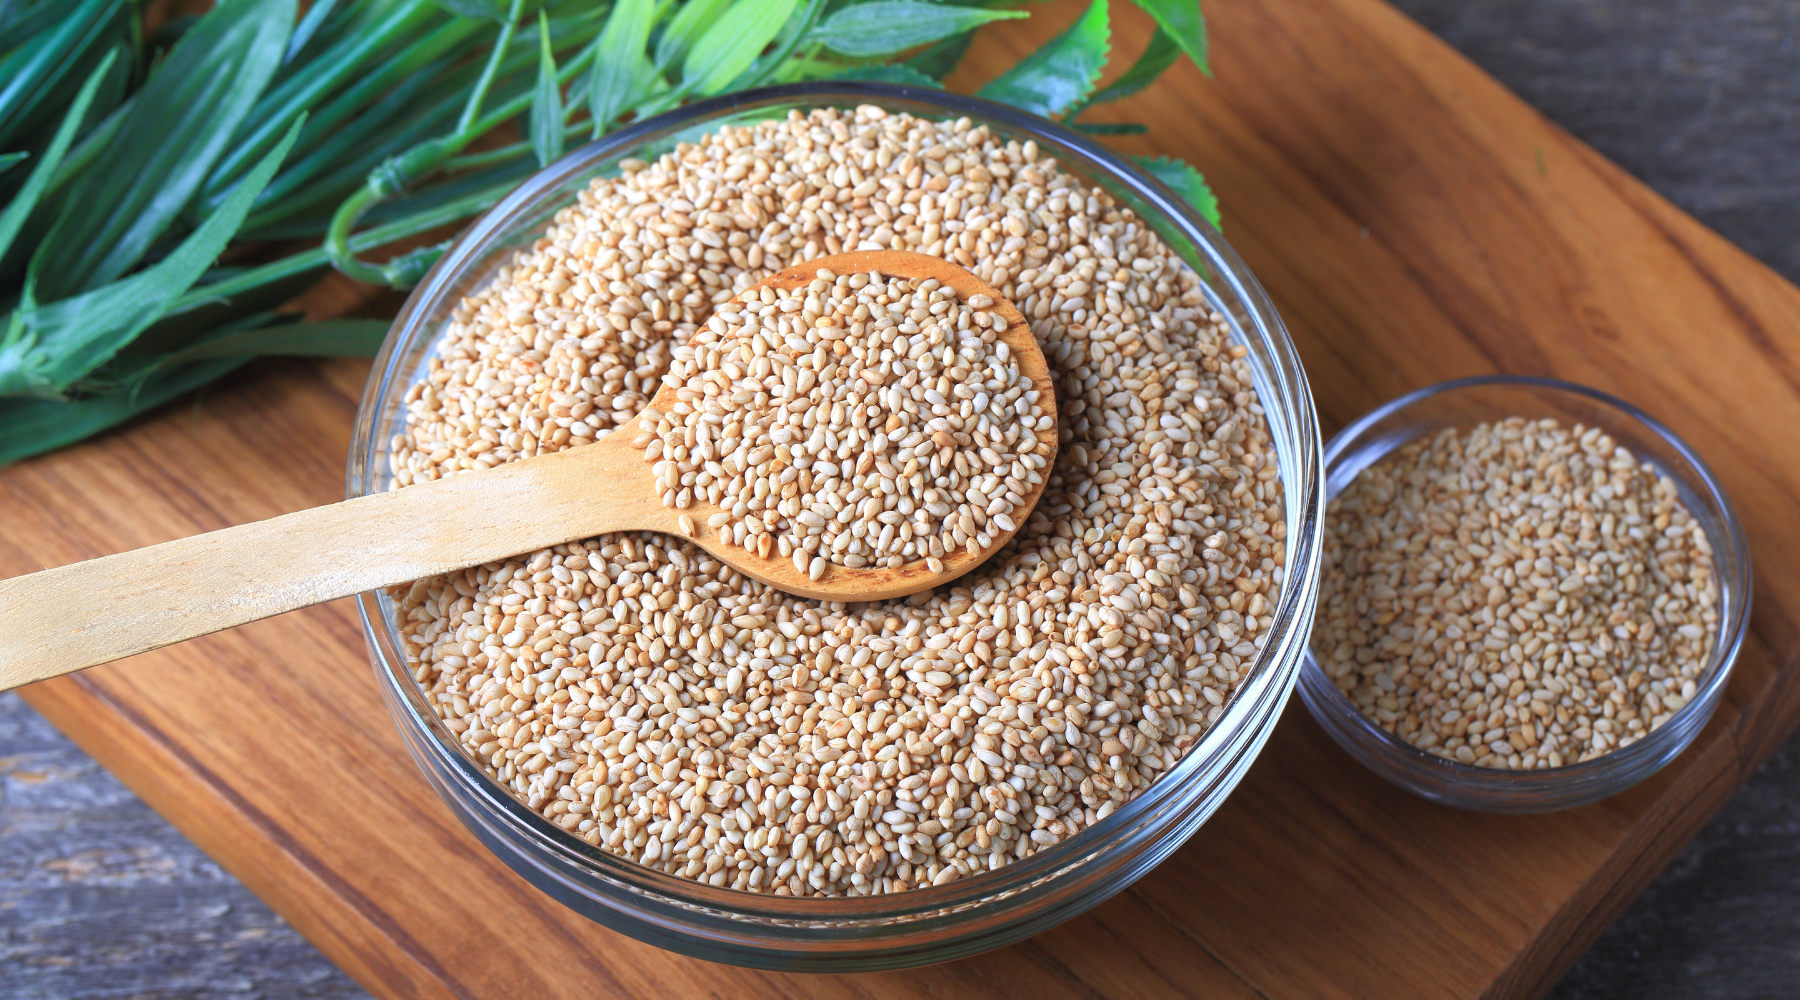 8 REASONS WHY QUINOA IS GOOD FOR YOU